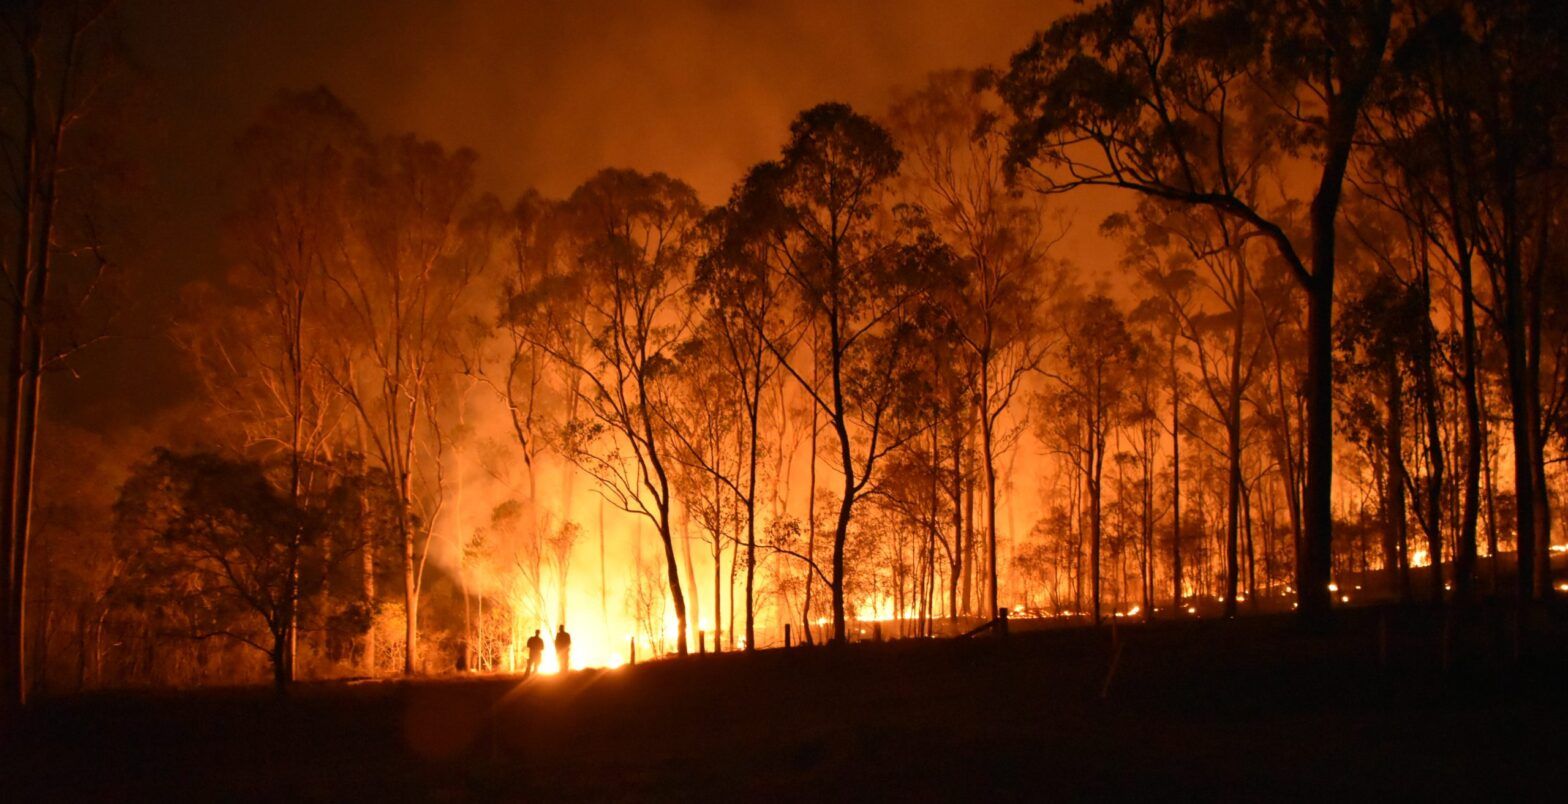 Increasing risk of wildfires threatens global economic growth